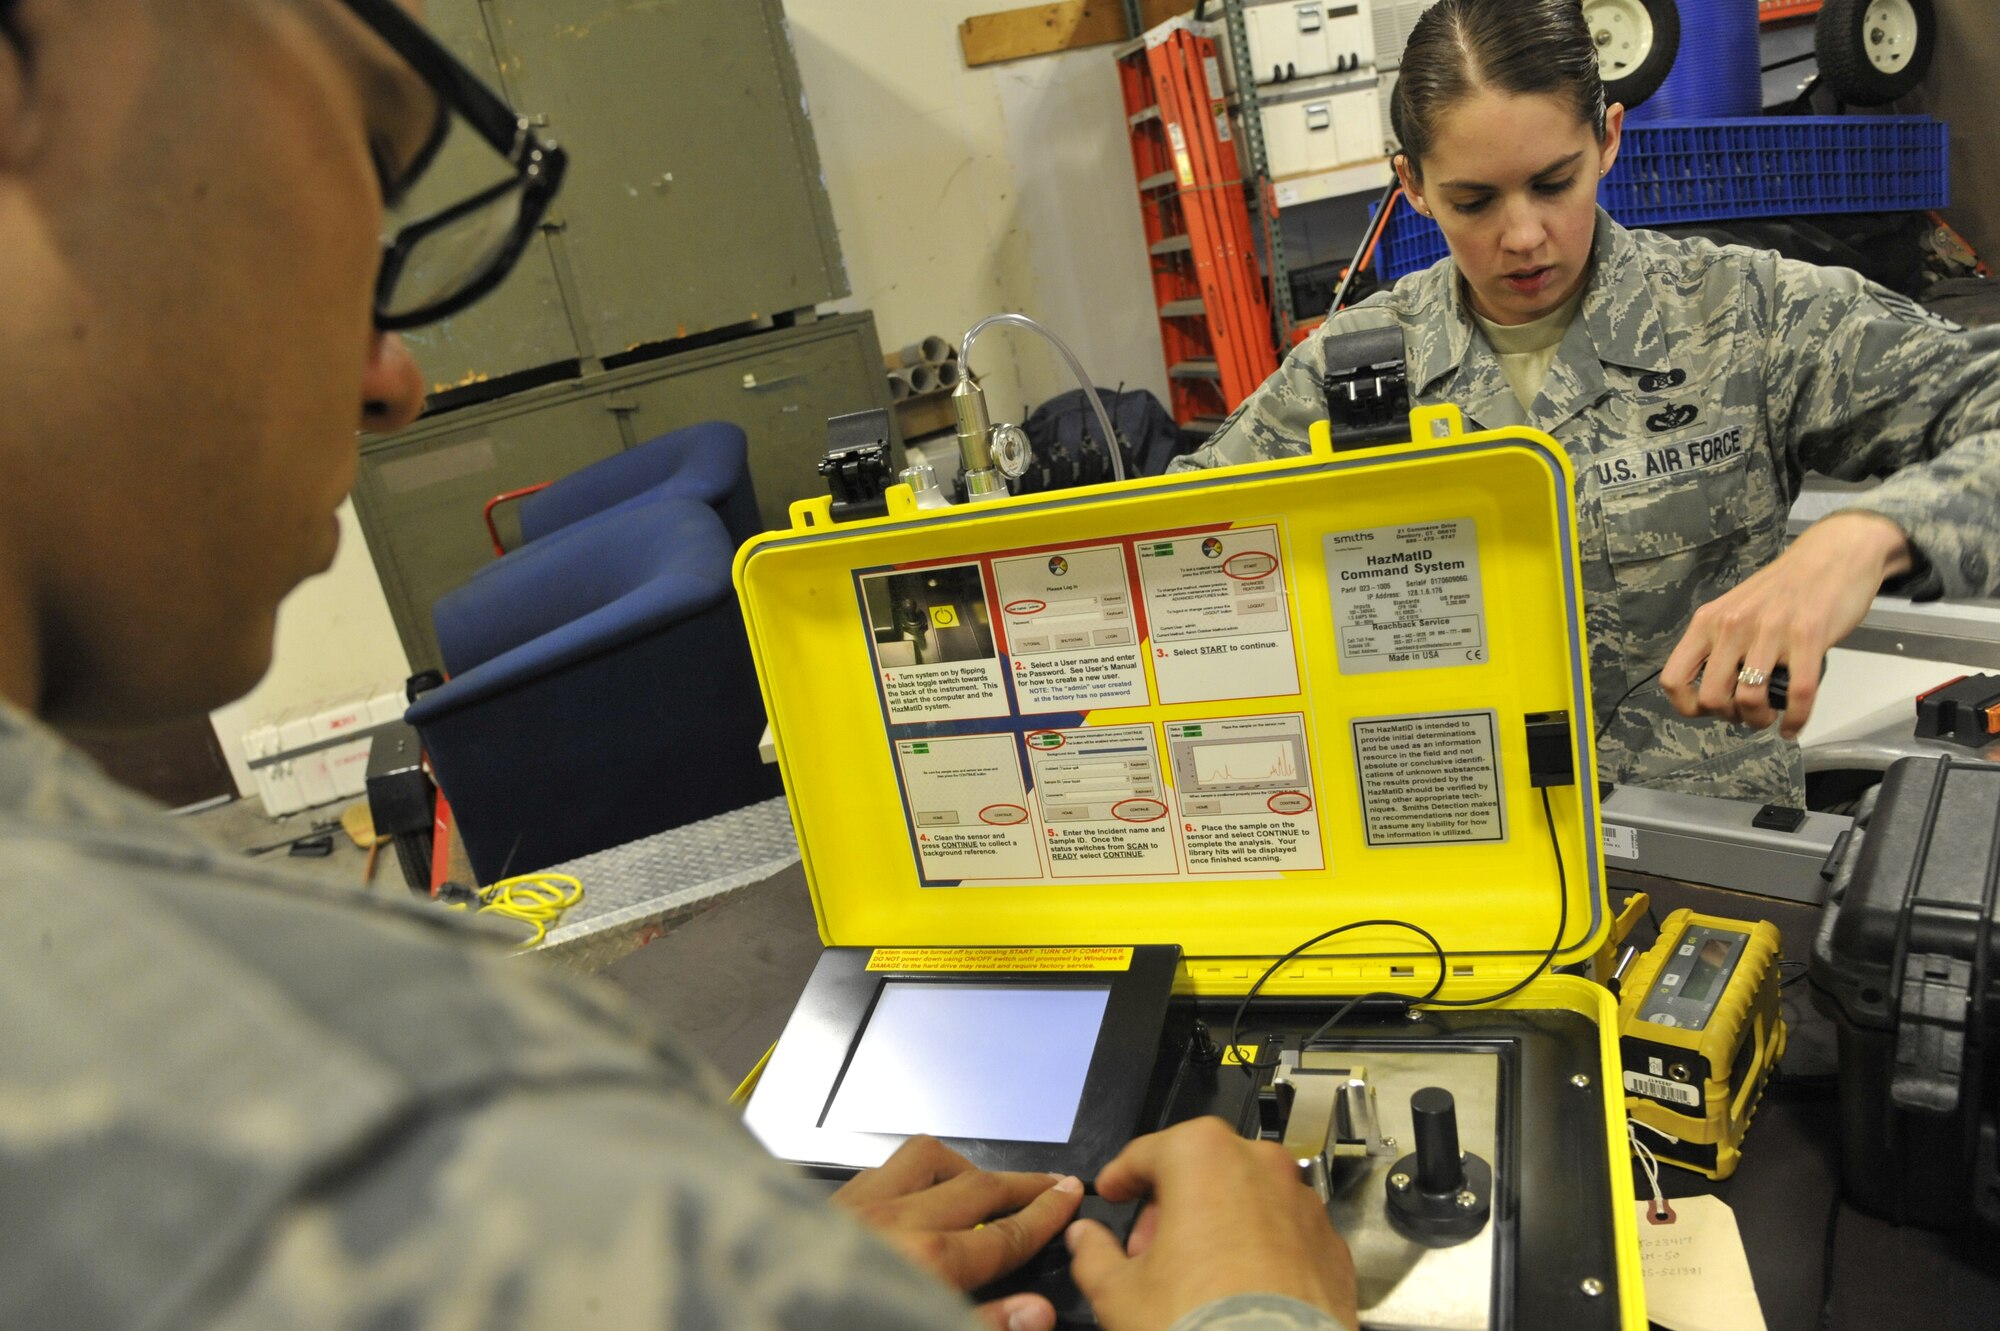 Staff Sgt. Rebecca Buhrman, 509th Civil Engineer Squadron NCO in charge of emergency management logistics, and Airman 1st Class Alfredo Guzman, 509th CES journeyman, set up the hazardous material identifier (HAZMAT ID) at Whiteman Air Force Base, Mo., May 22, 2013. Airmen use the HAZMAT ID to detect chemicals and biological agents, and provides readouts of tested material, showing whether contamination is present or not. (U.S. Air Force photo by Airman 1st Class Keenan Berry/Released)